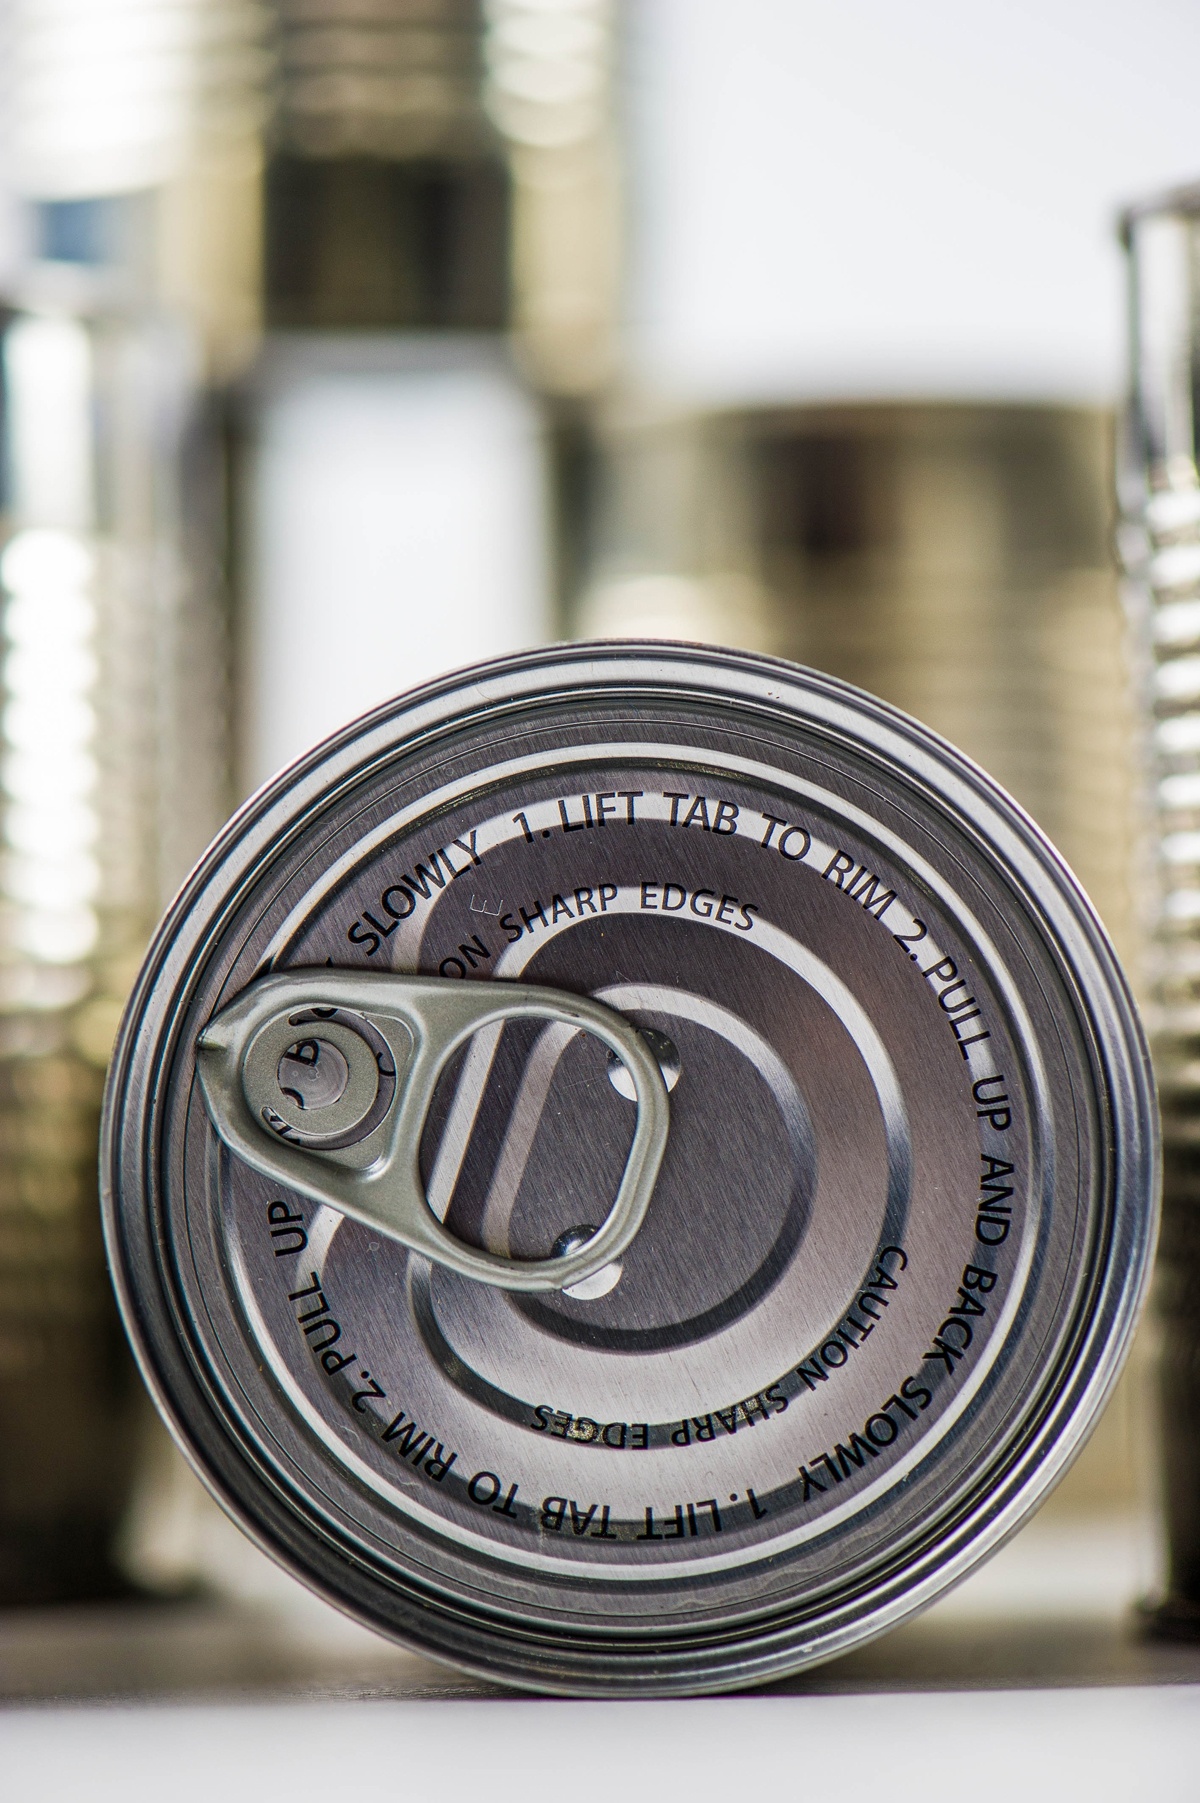 6 Canned food myths debunked - Getting to the truth about canned foods can assuage some of those concerns and help those on the fence stock up on these budget-friendly staples. 